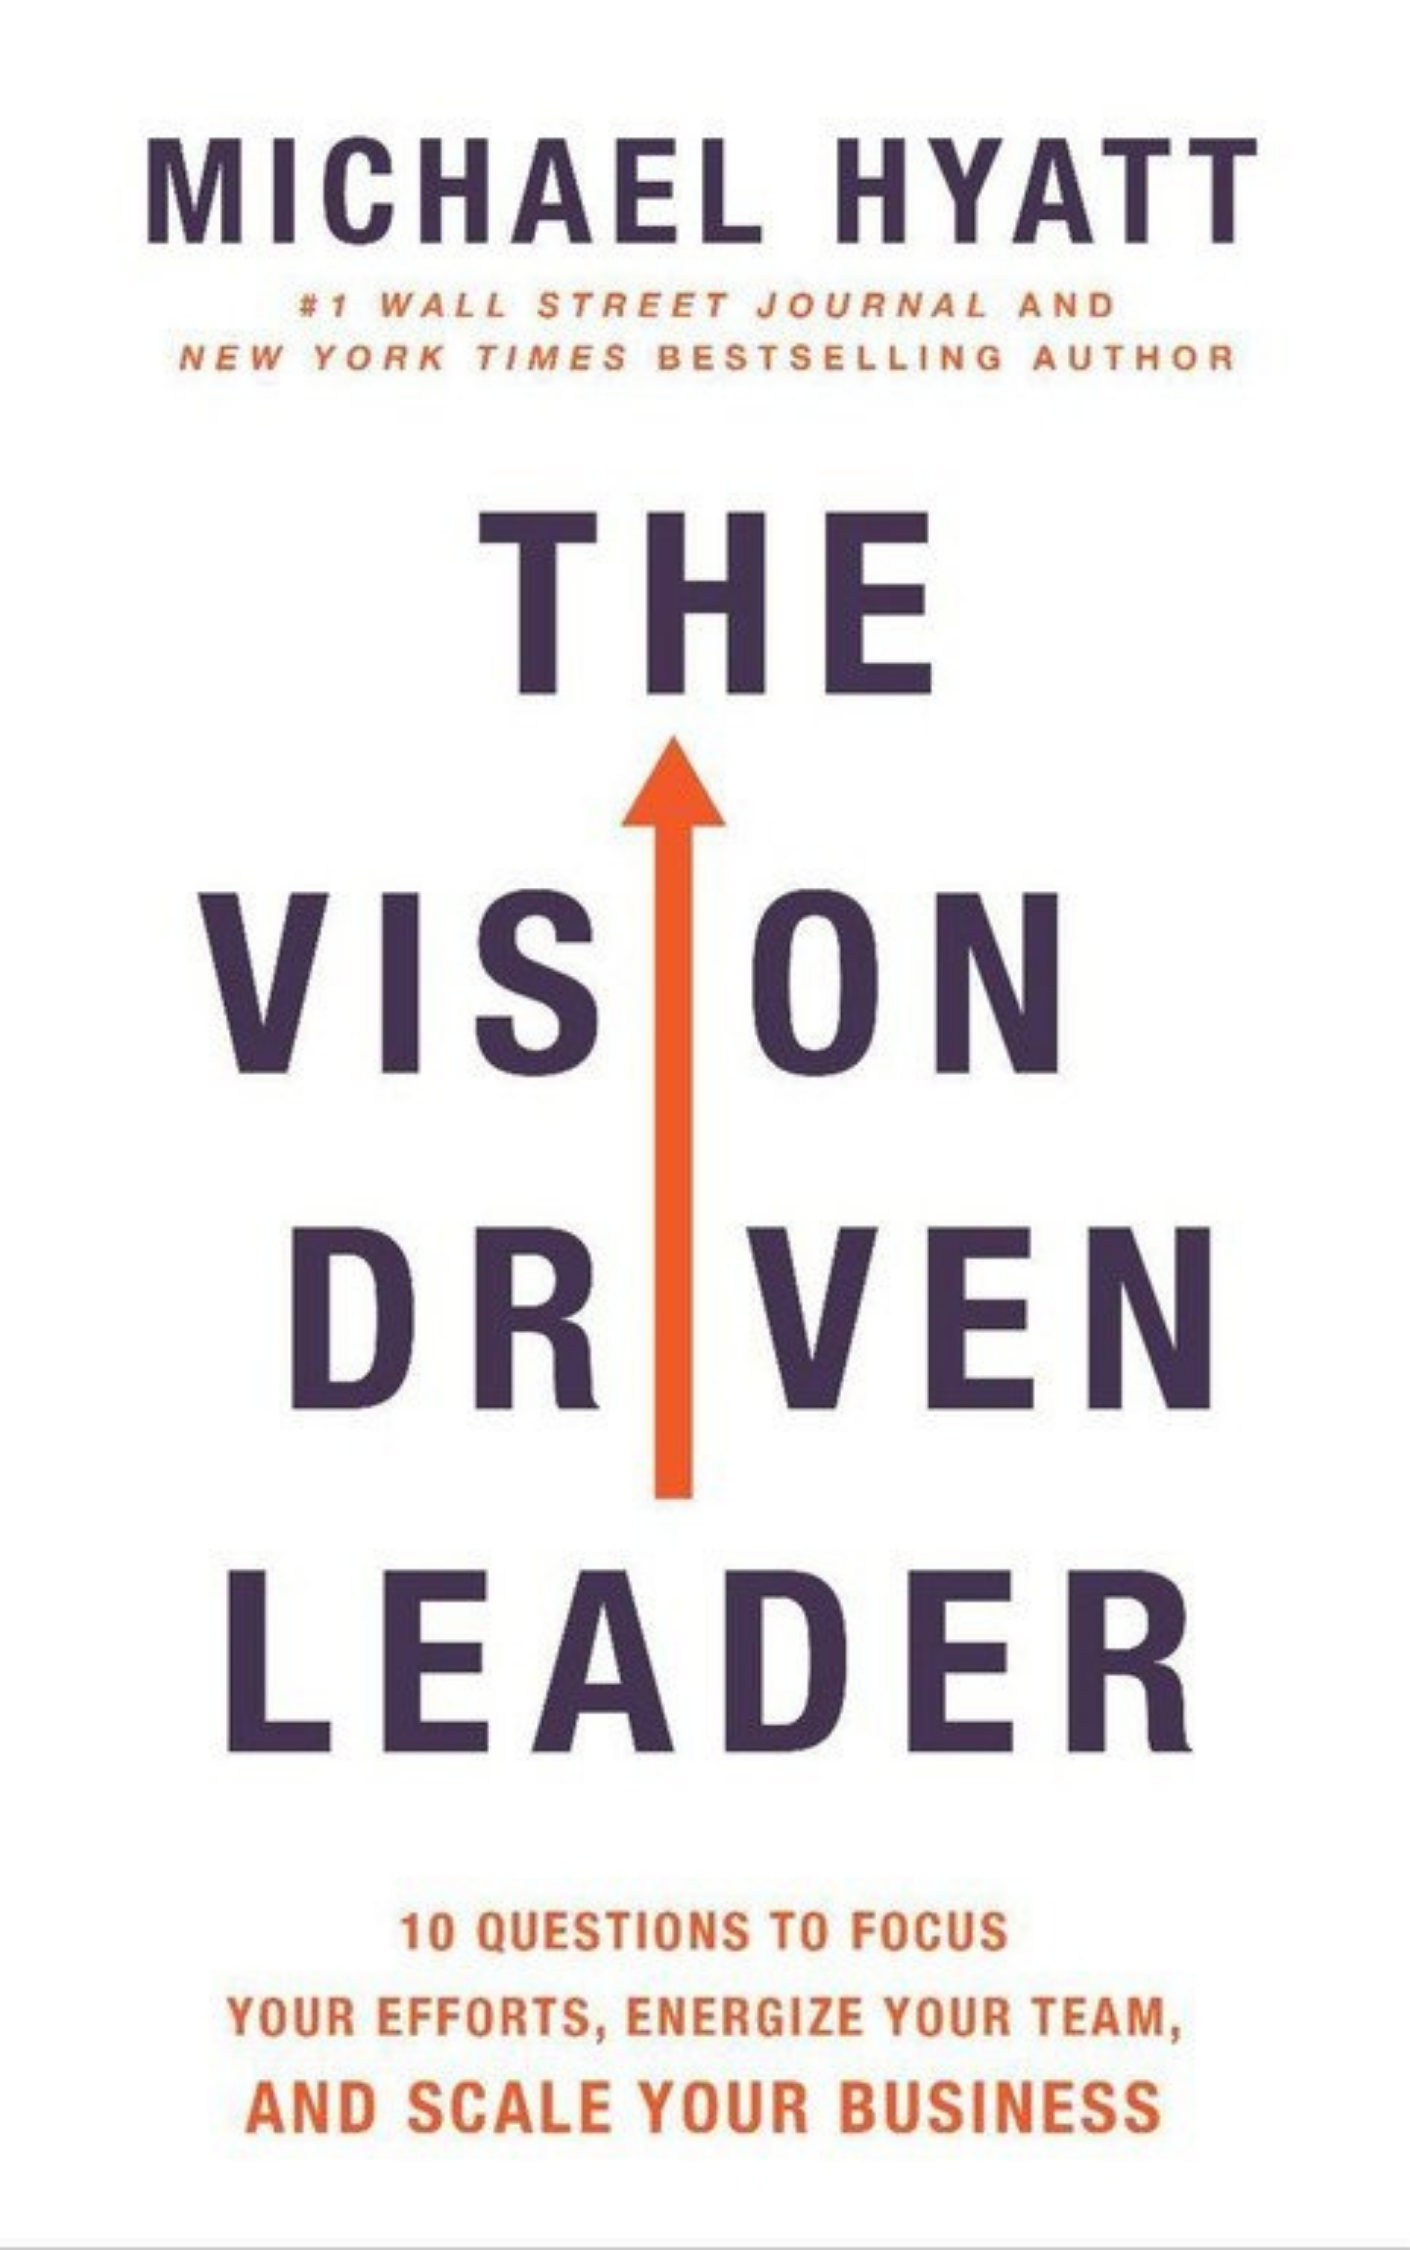 THE VISION DRIVEN LEADER